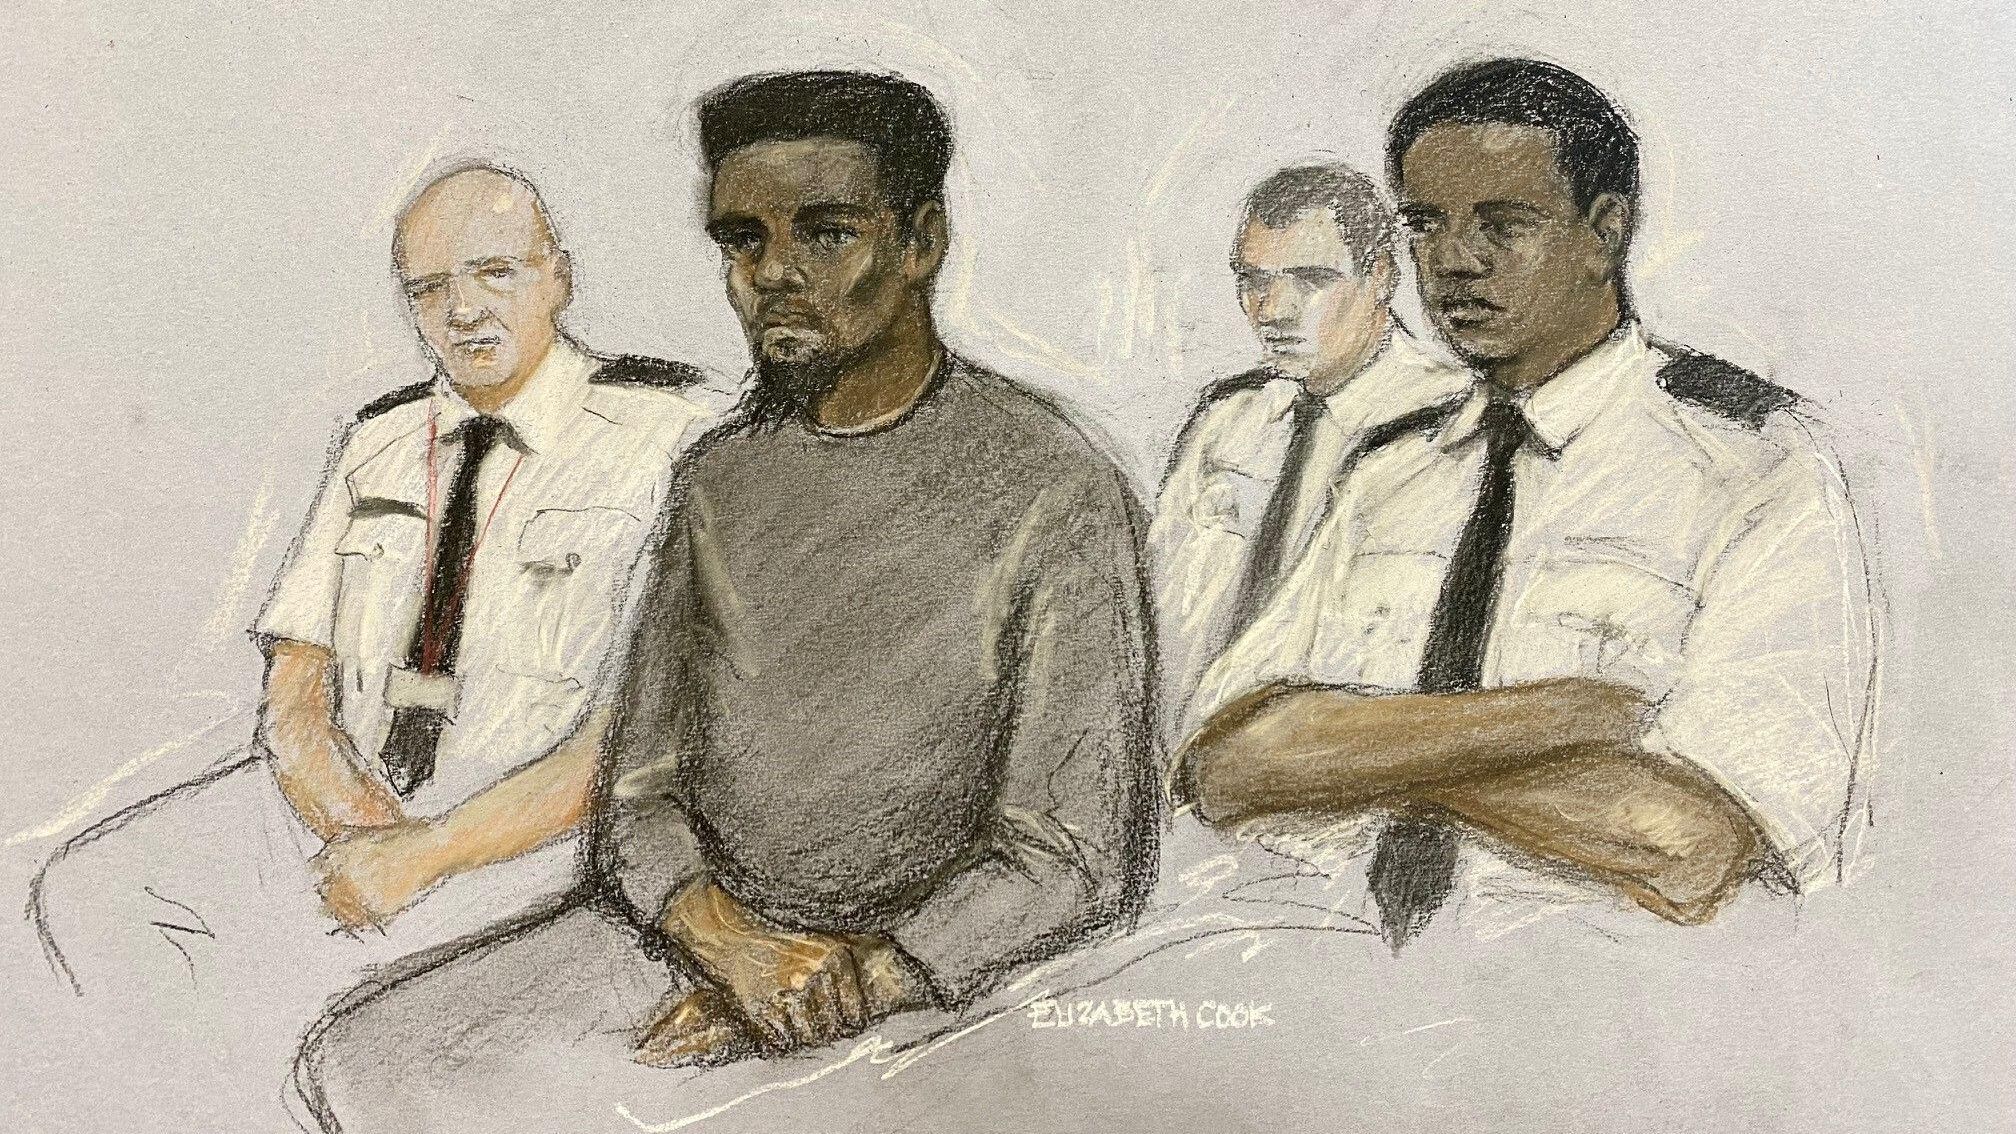 Mosque attacks: Man found guilty of attempted murder | News - Free ...